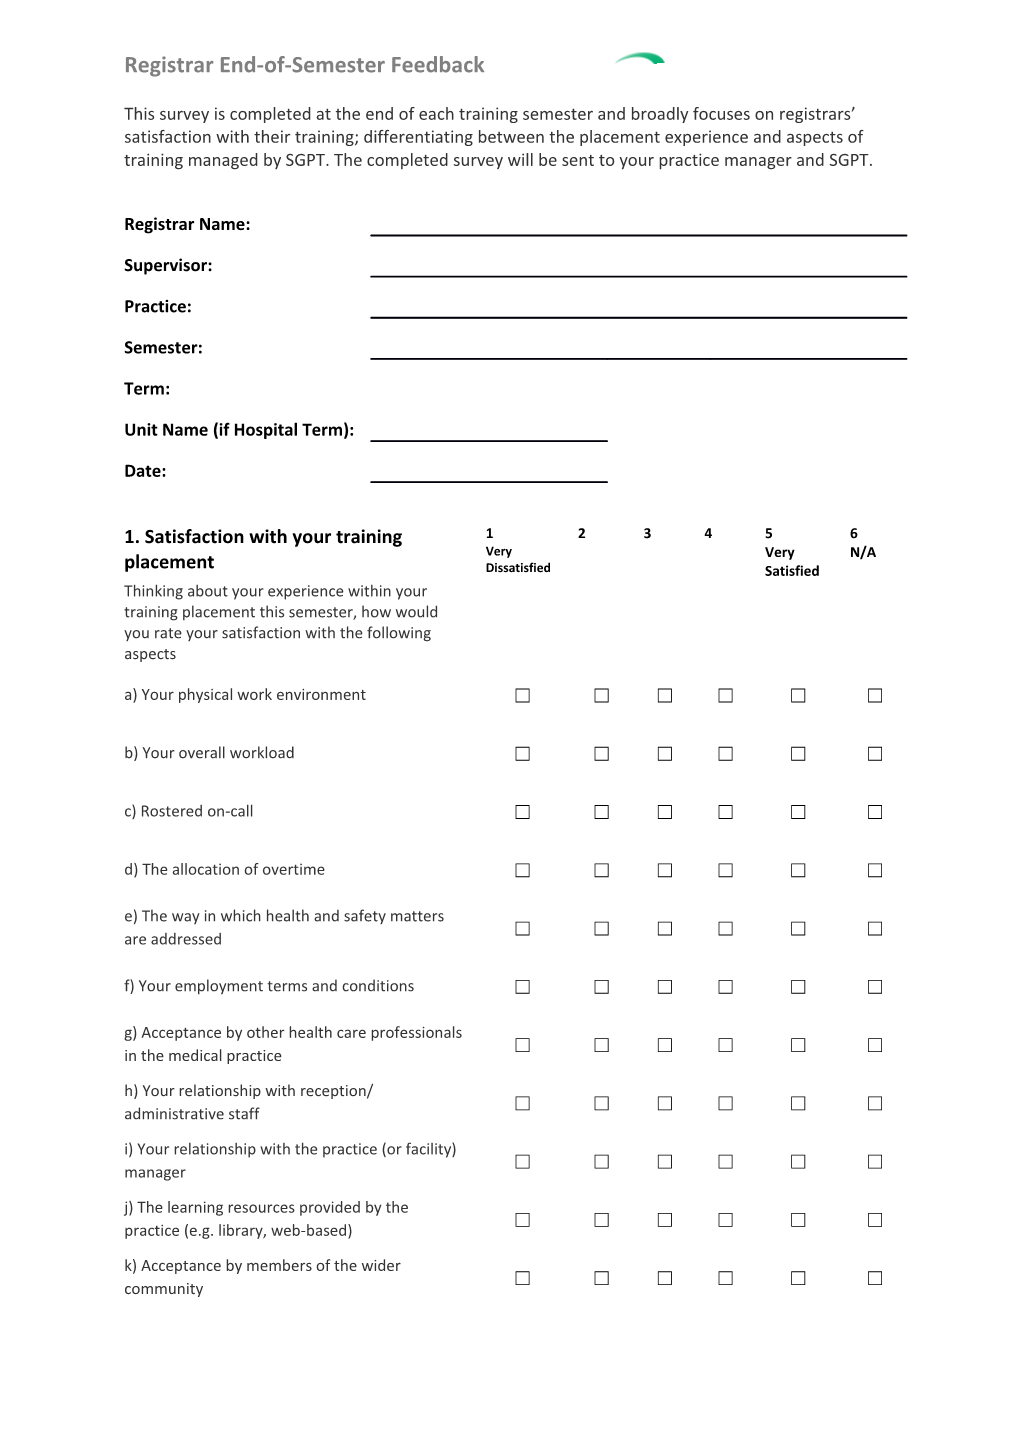 This Survey Is Completed at the End of Each Training Semester and Broadly Focuses on Registrars